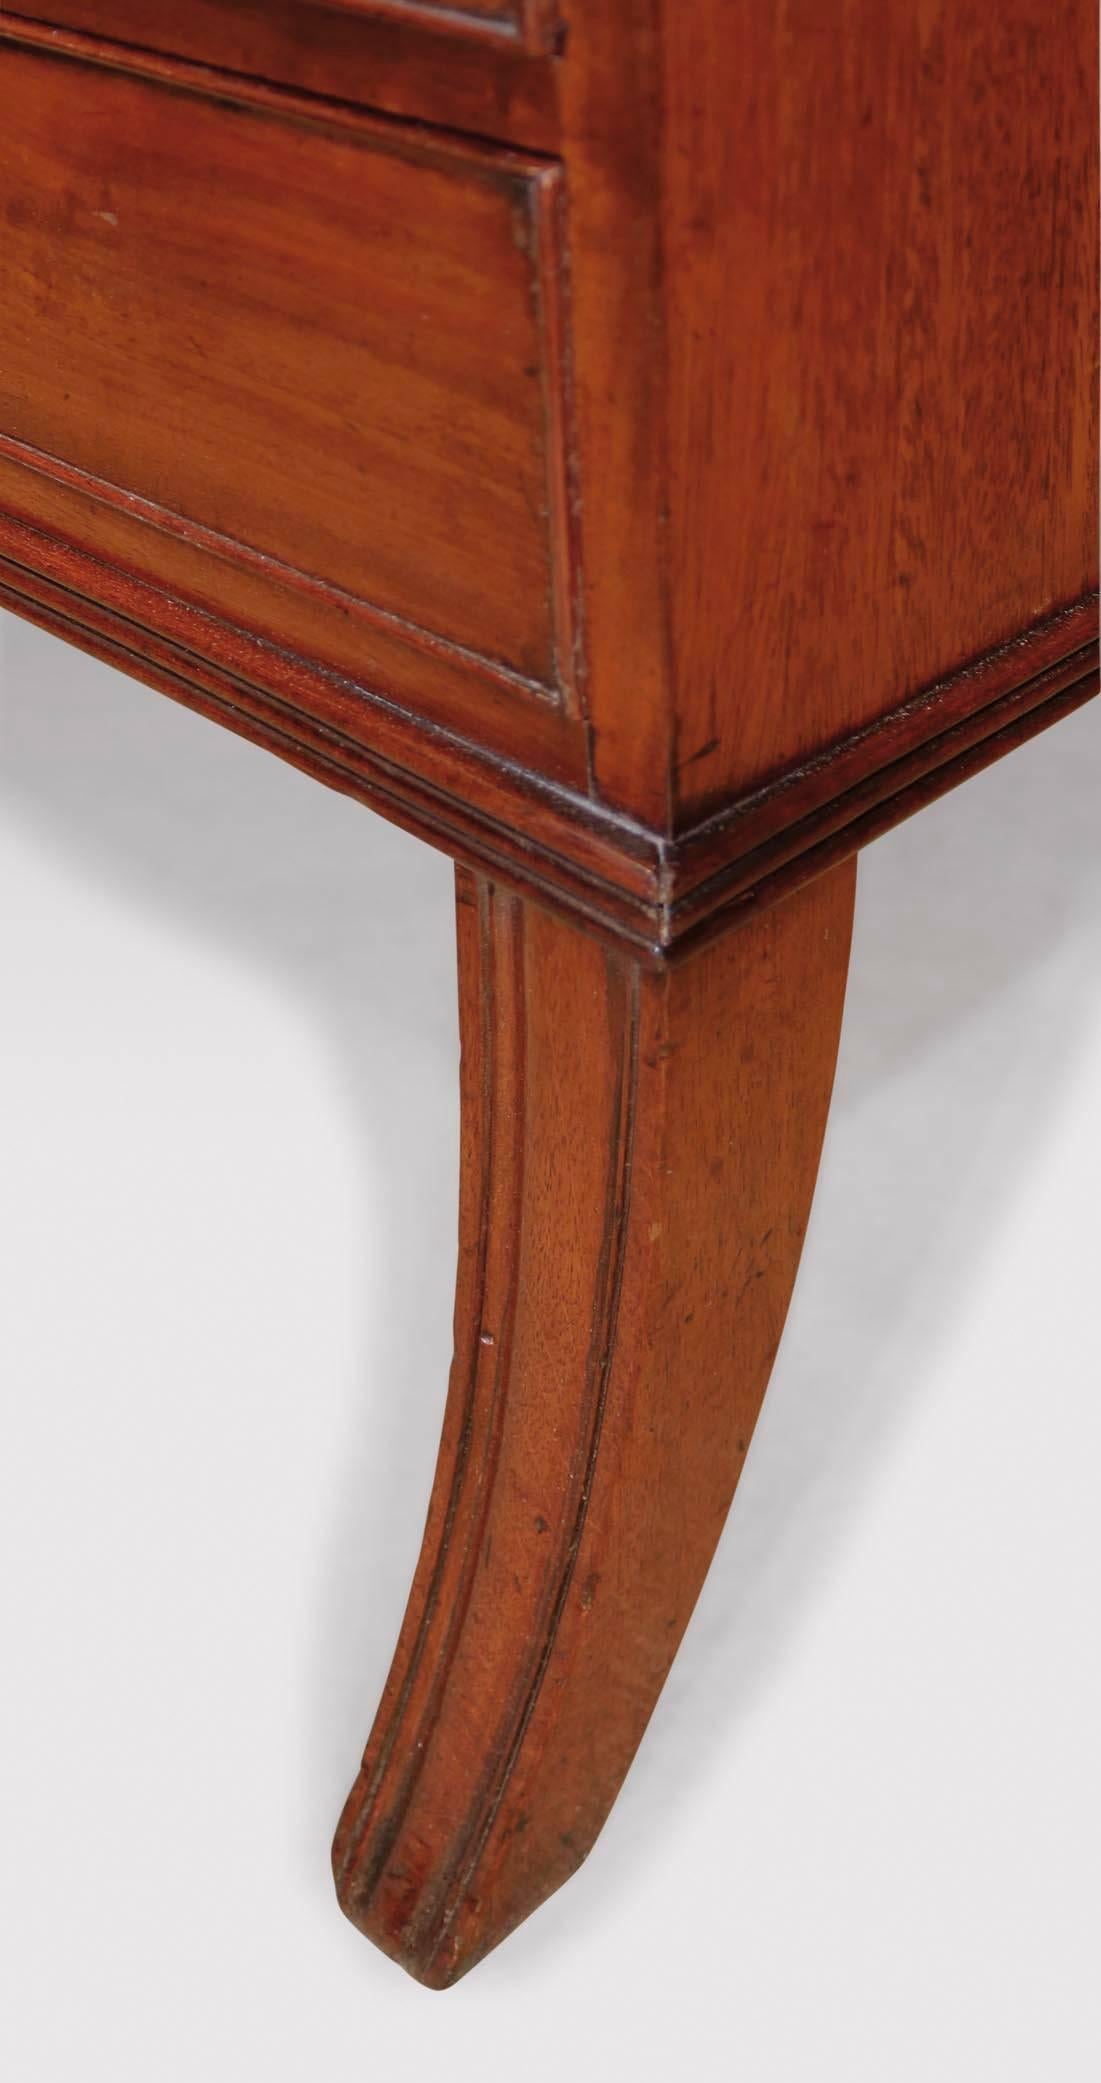 An early 19th century Regency period mahogany waterfall bookshelf, having shaped sides and open shelves above four cockbeaded drawers supported on sabre legs, circa 1820.